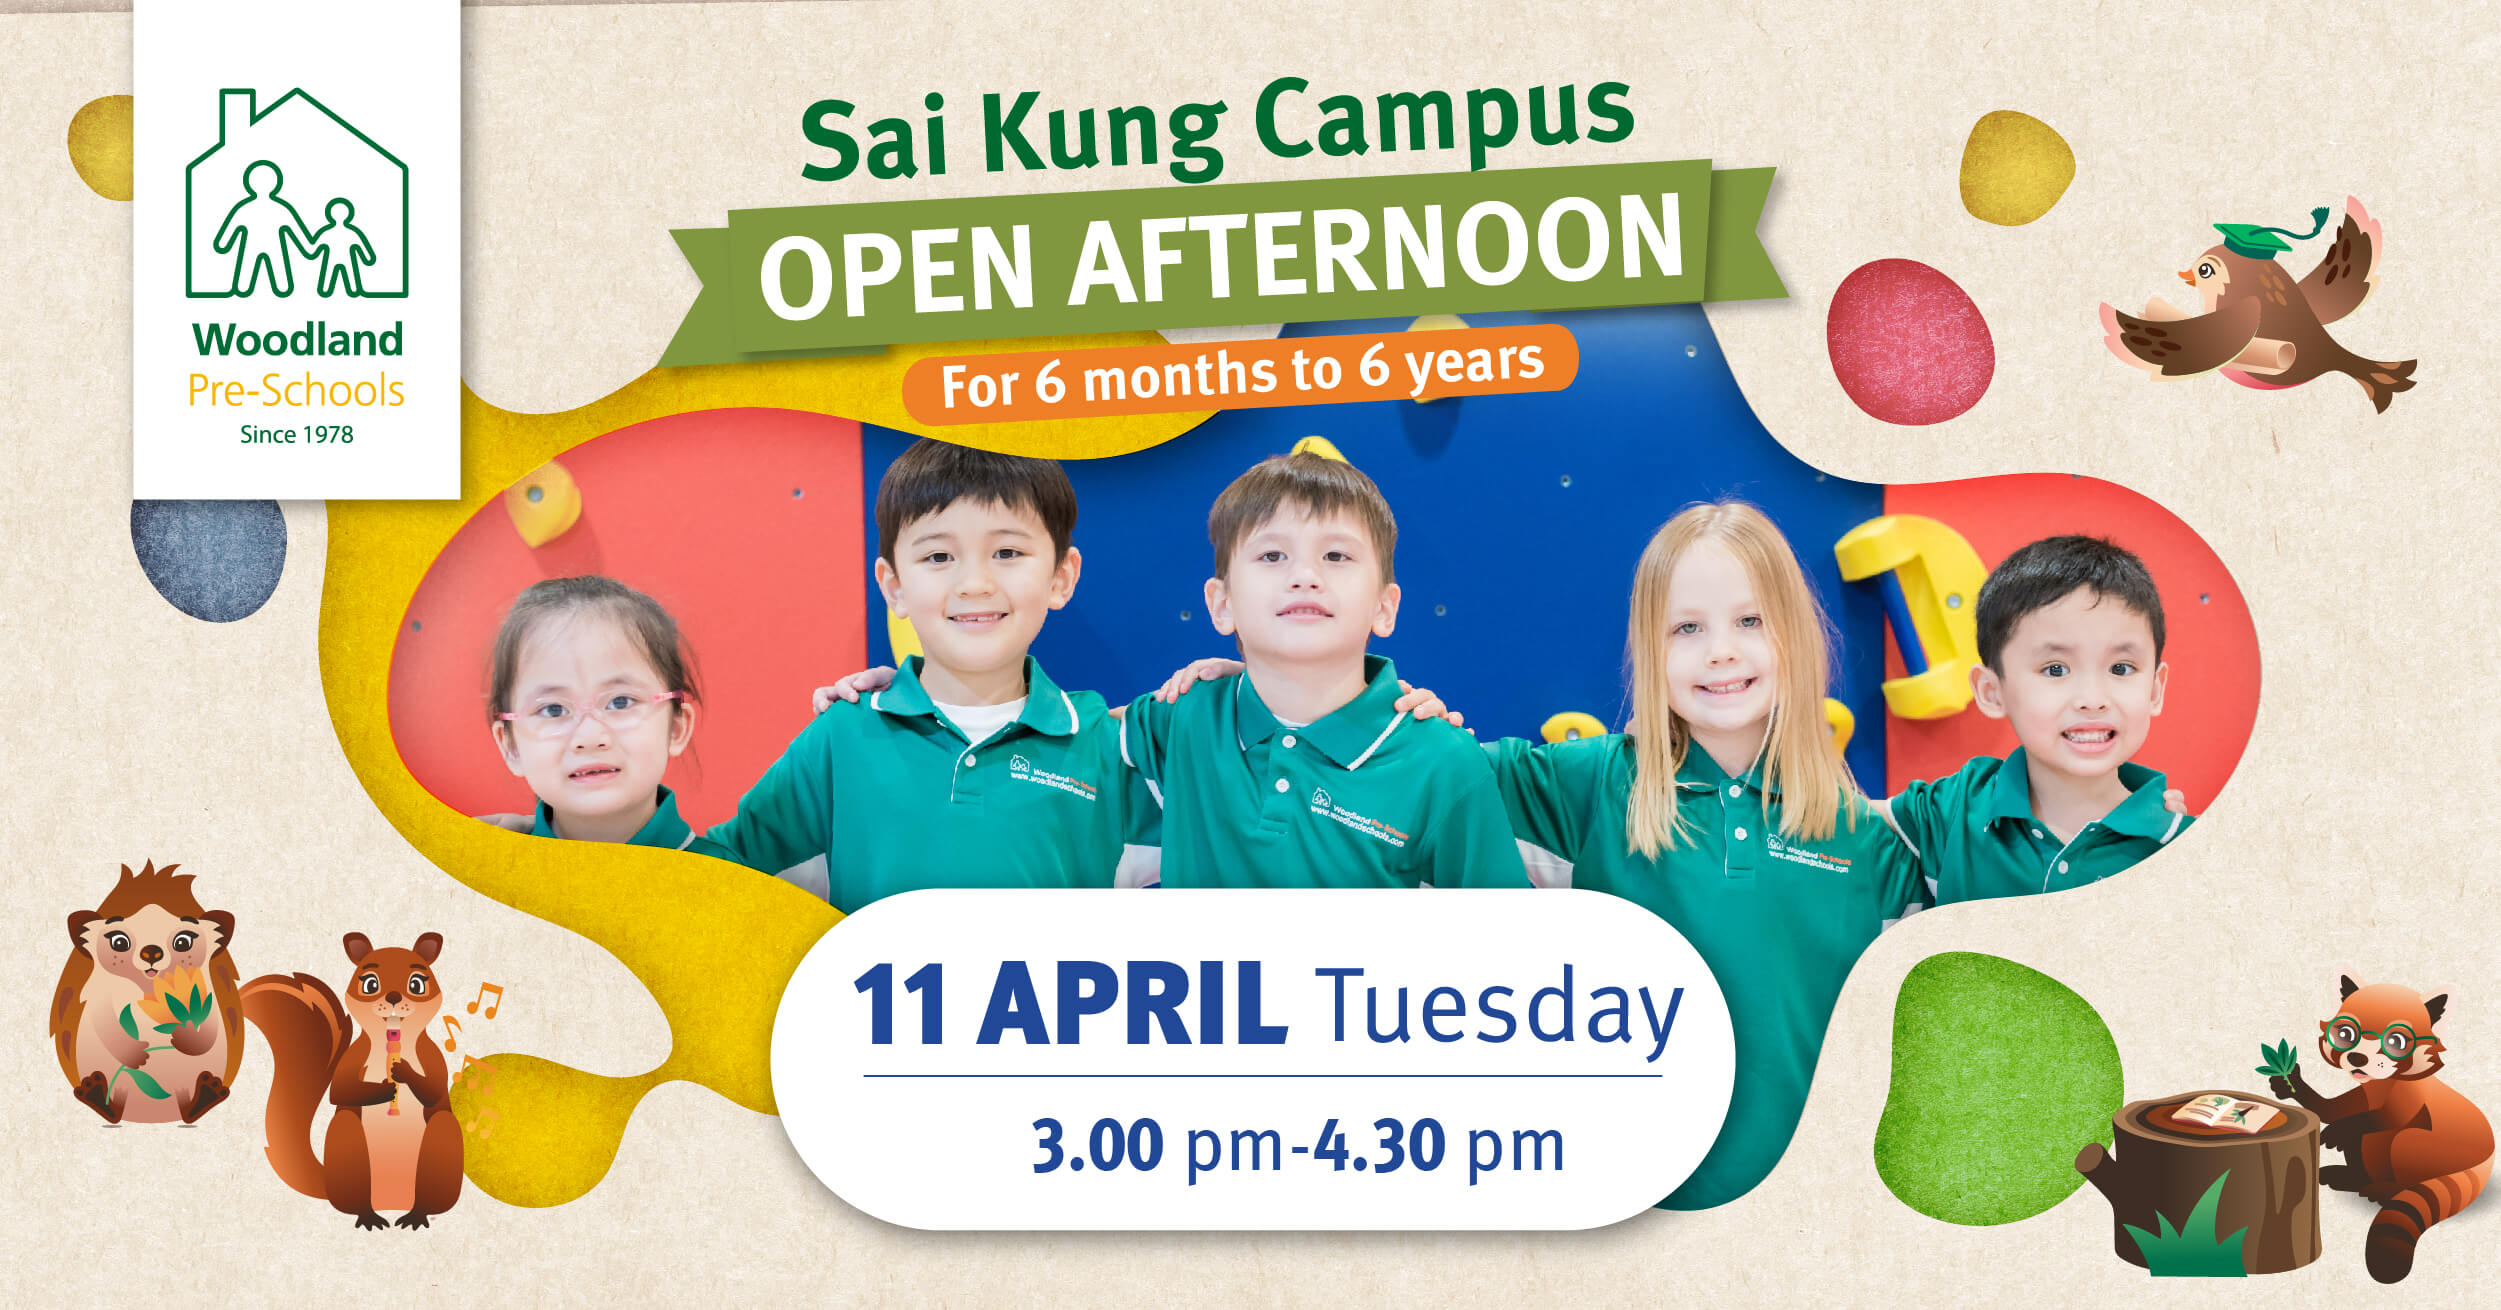 Sai Kung campus hosting a fun open afternoon for children 6 months to 6 years